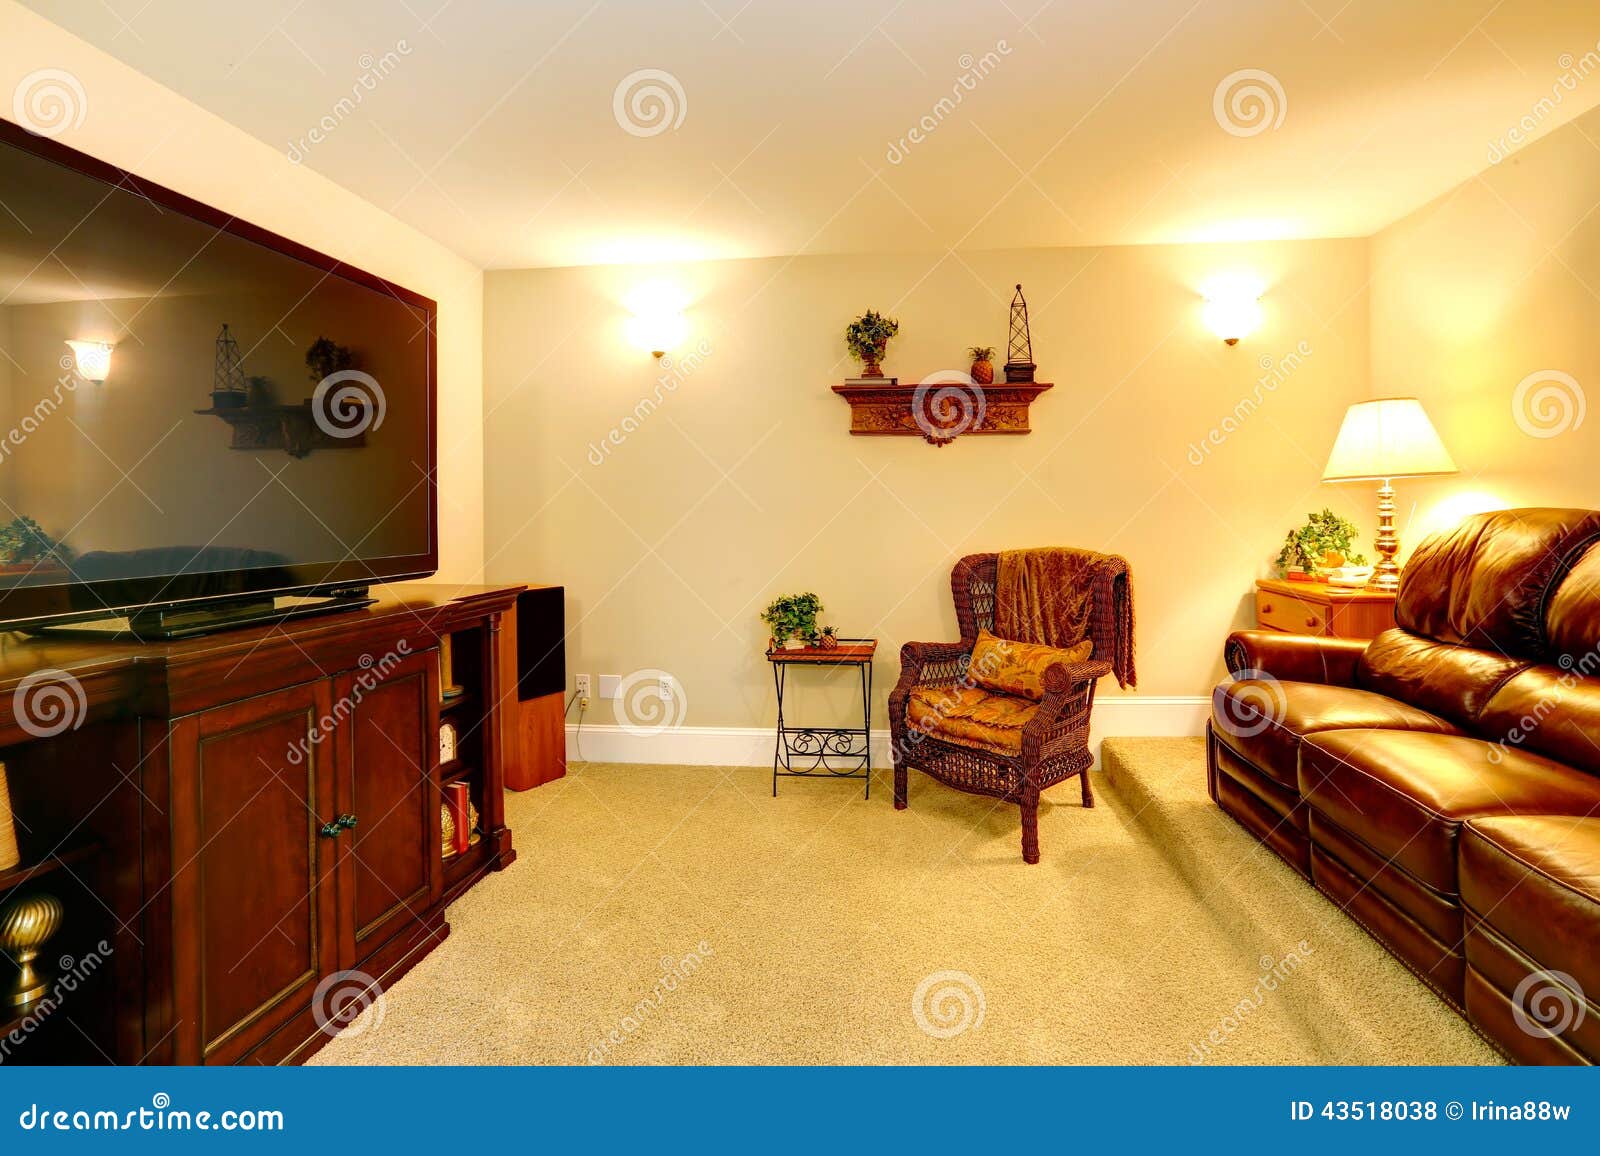 Cozy room with leather couch and TV. Cozy room wiht leather couch, wicker chair and cabinet with TV